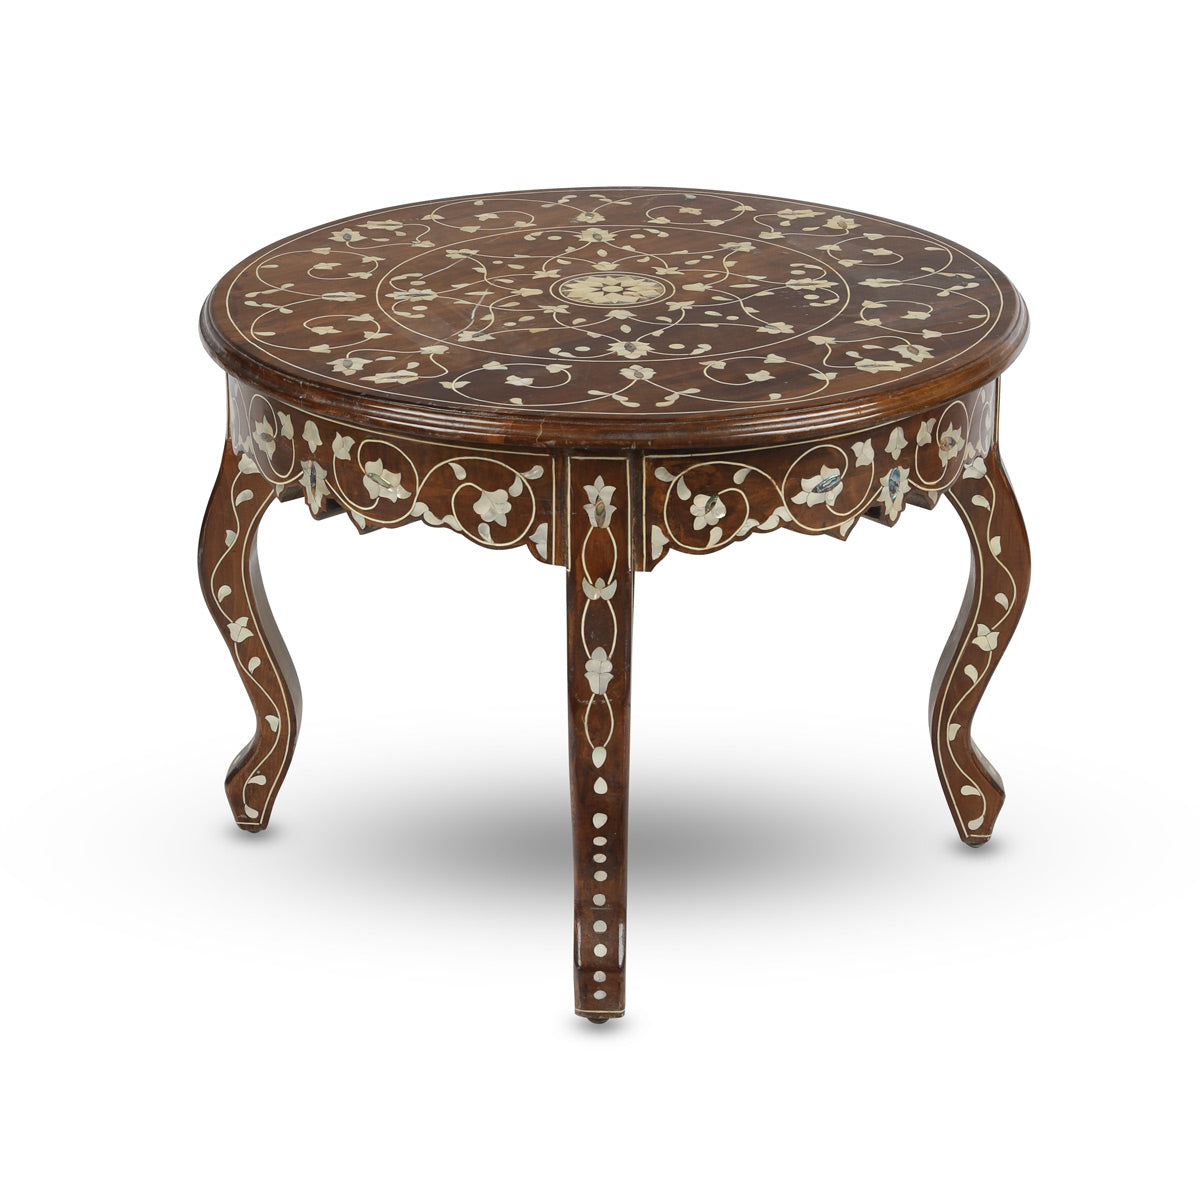 Angled Top View of Round Table With Mother of Pearl Inlays